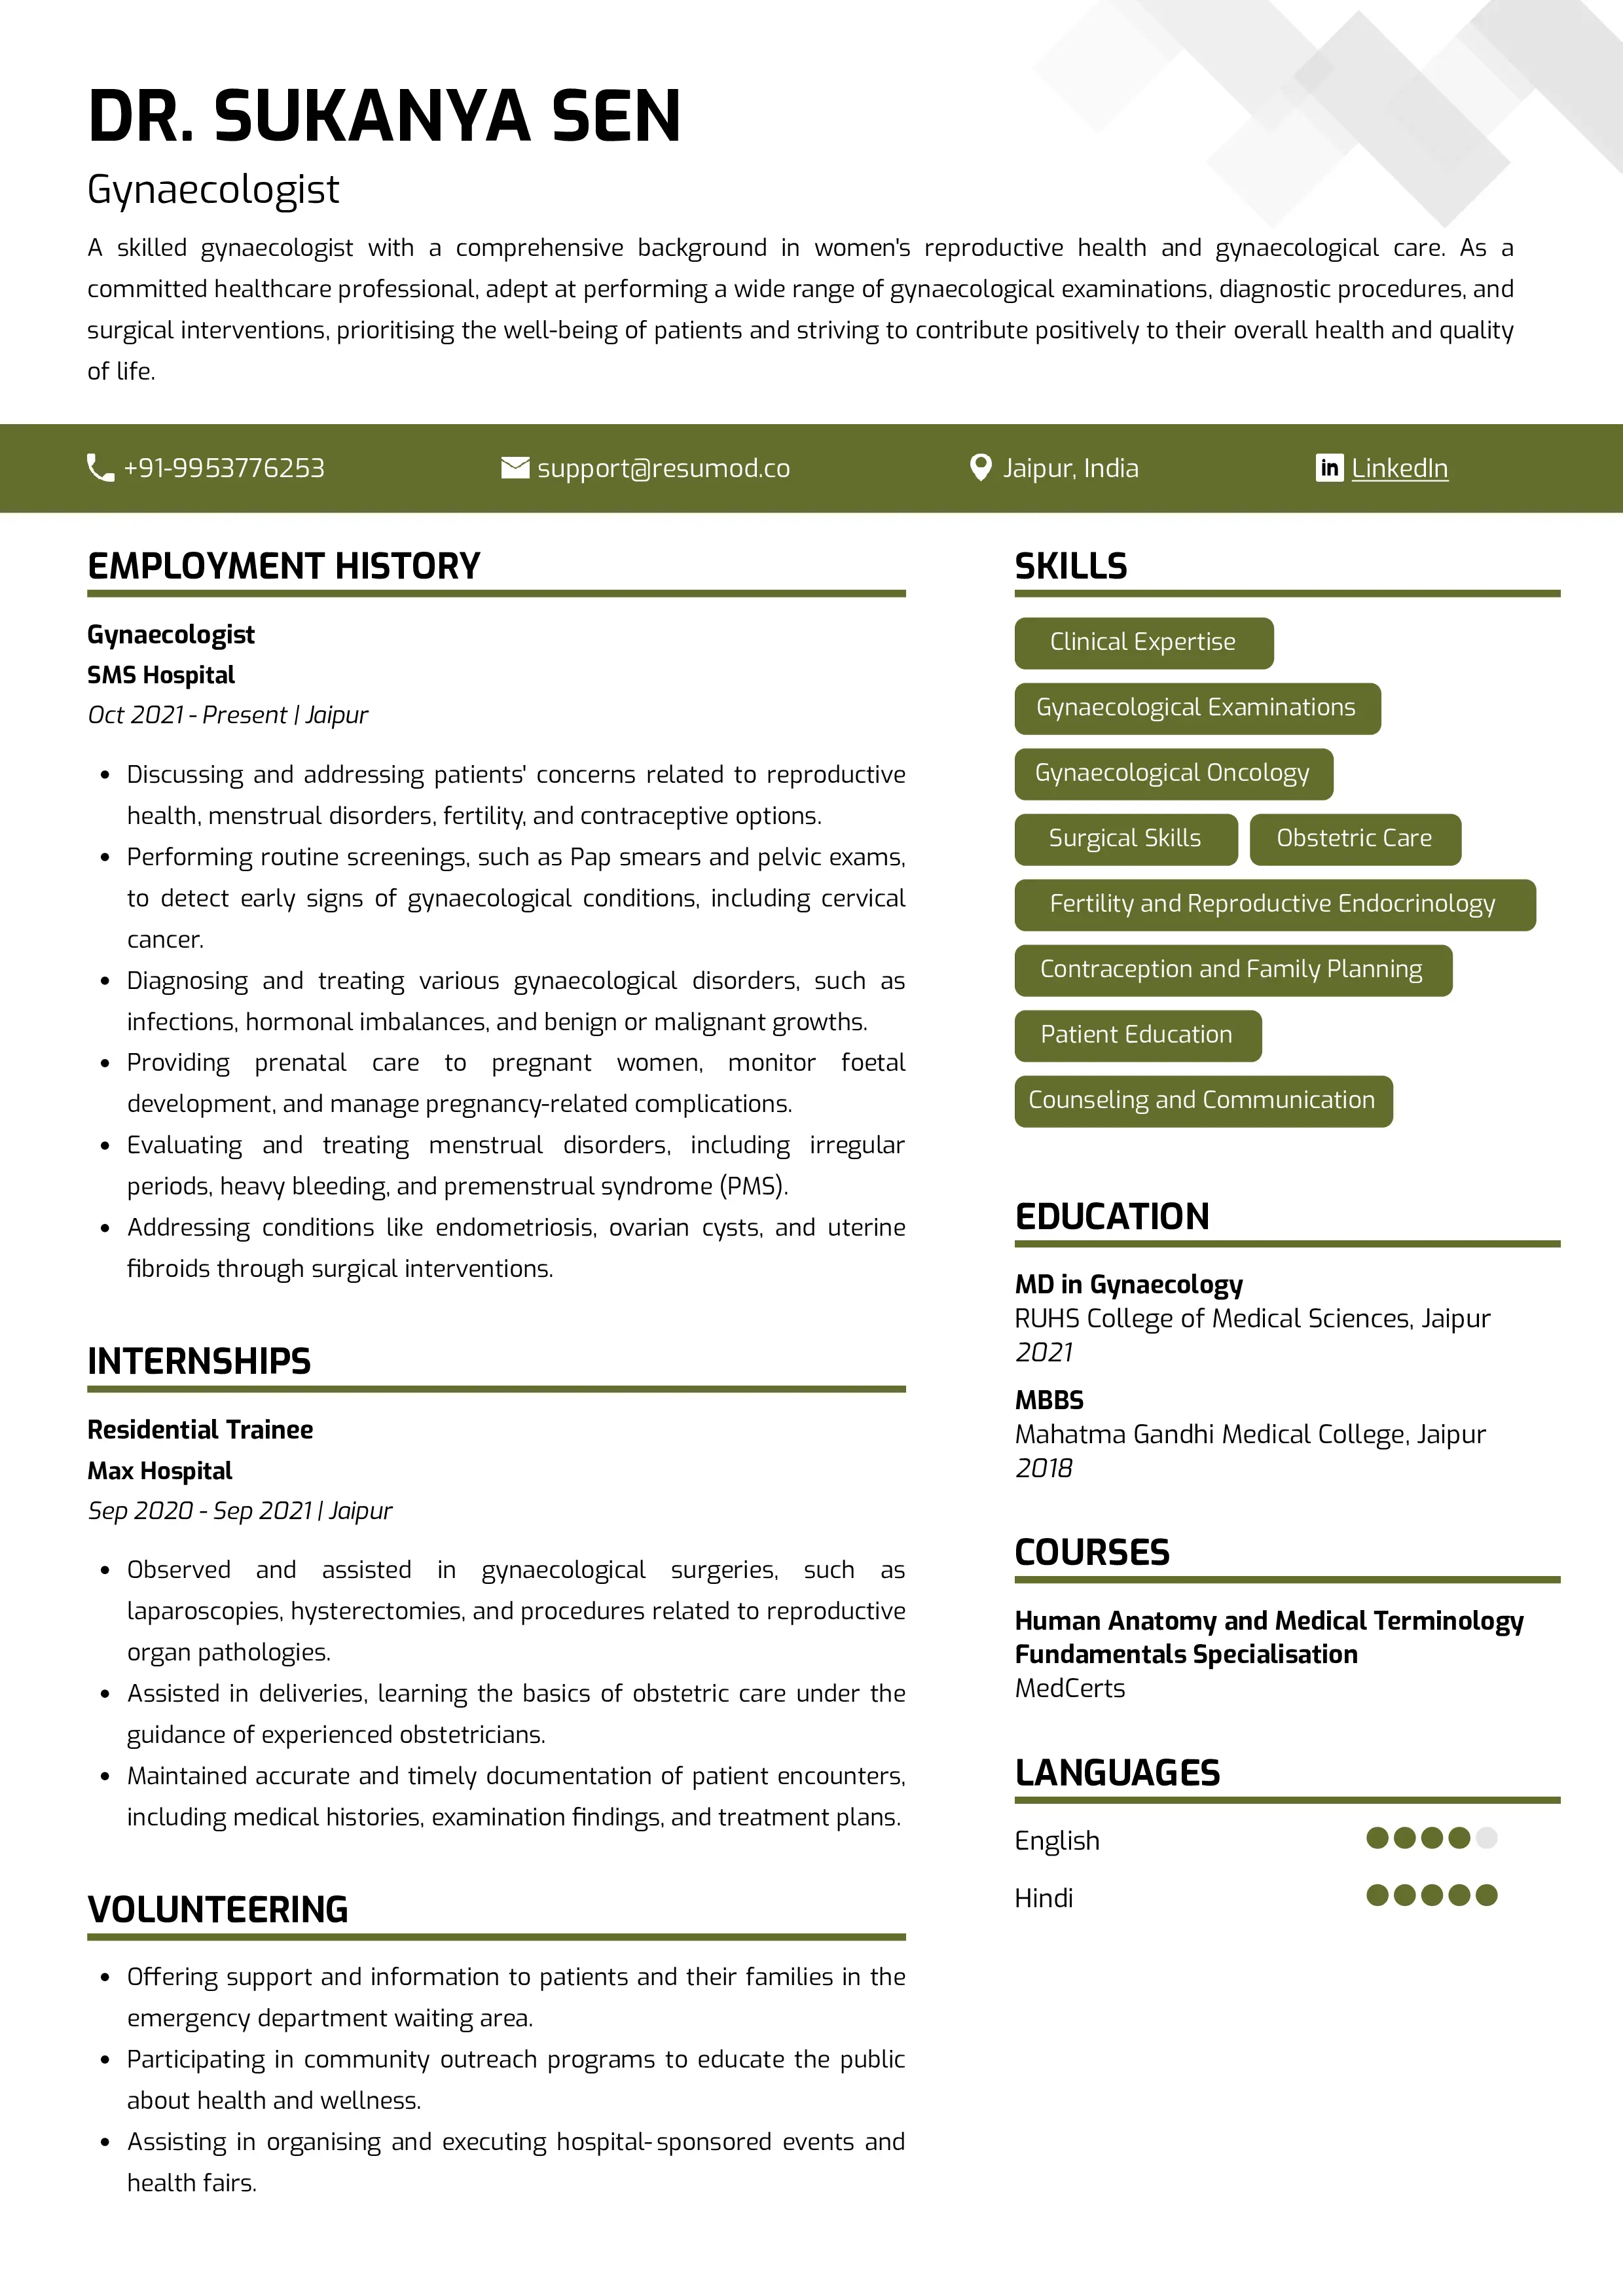 Sample Resume of Gynecologist | Free Resume Templates & Samples on Resumod.co